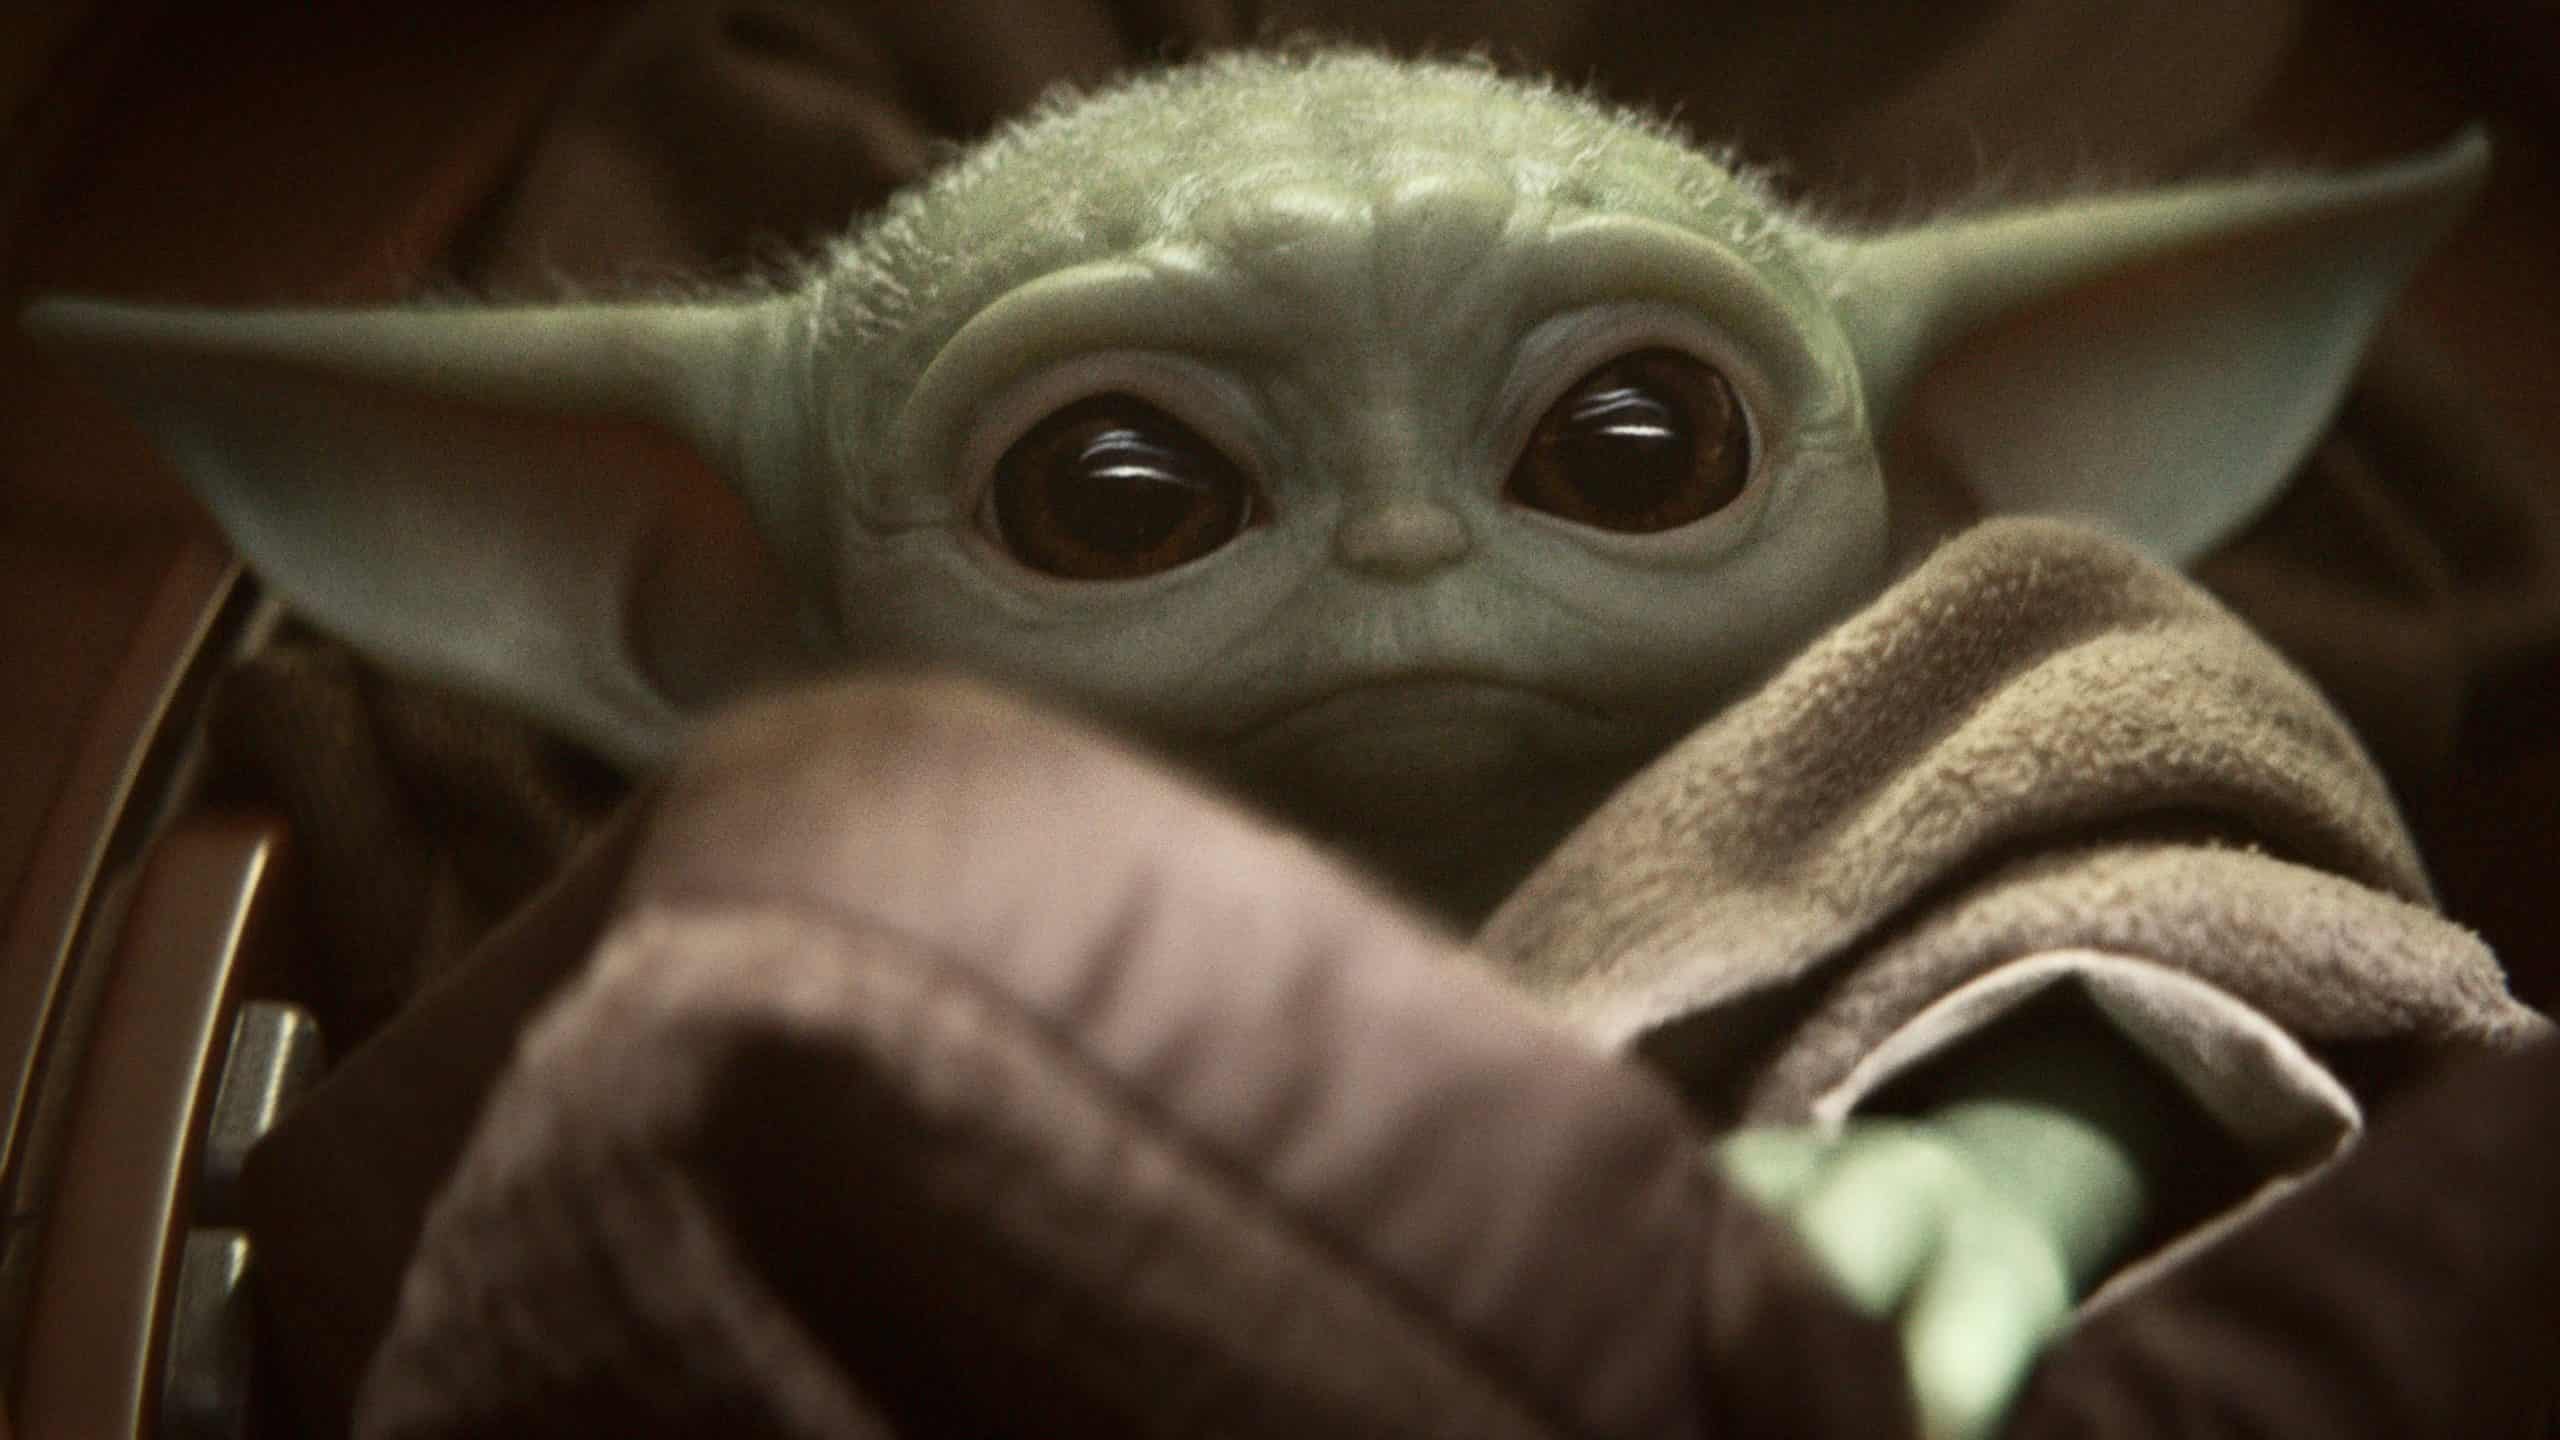 The Child from the Mandalorian Baby Yoda